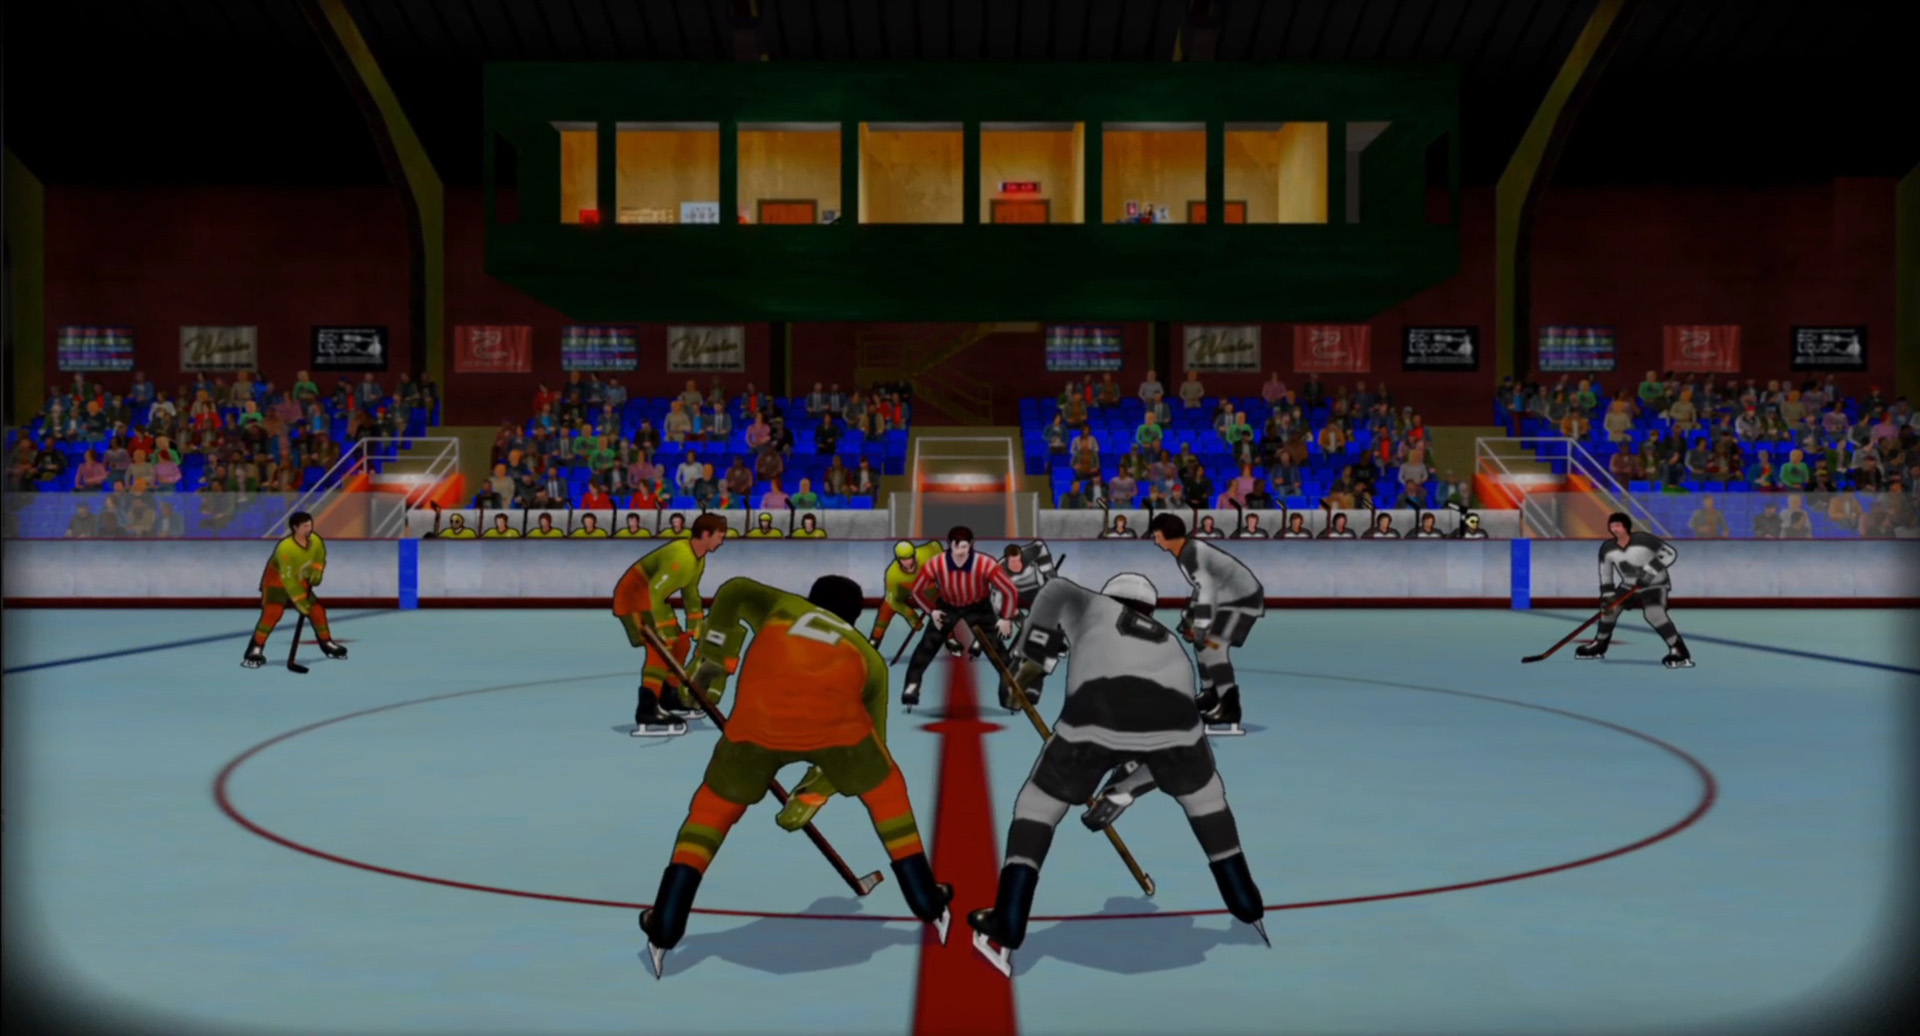 Old Time Hockey Review - Roughing It